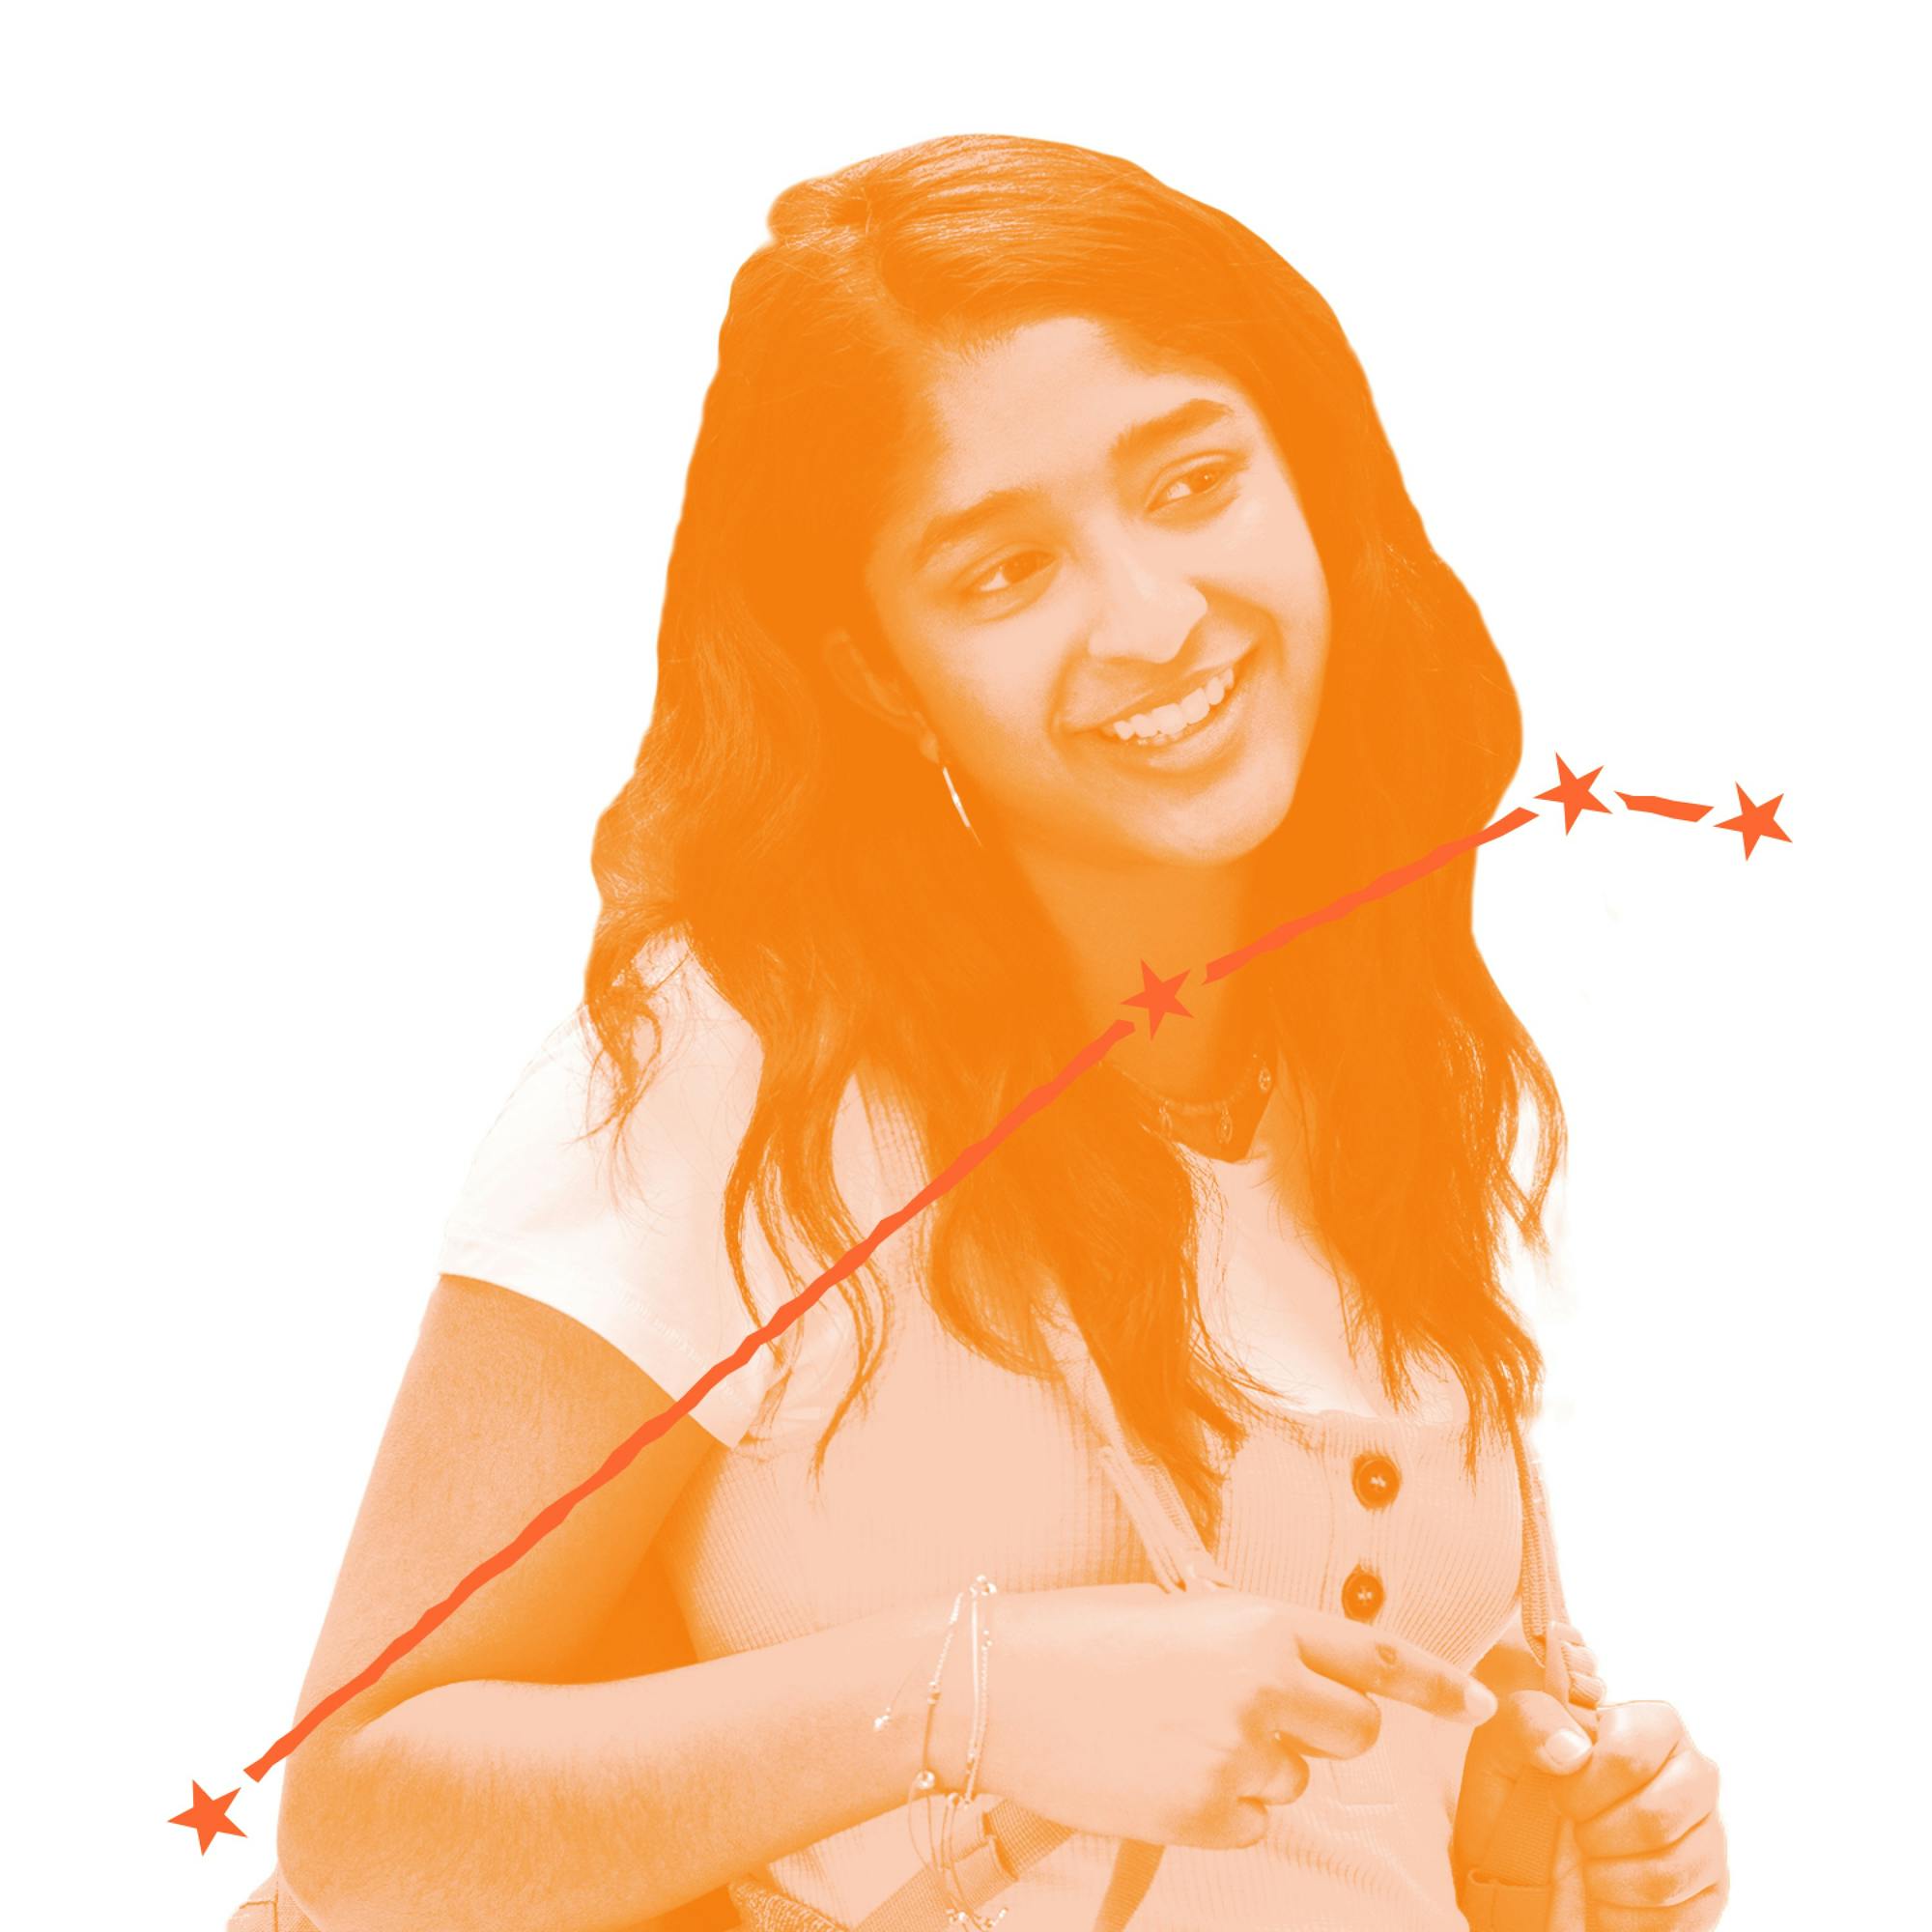 Devi Vishwakumar (played by Maitreyi Ramakrishnan) smiles in this still from Never Have I Ever. Wearing a white shirt and carrying a backpack, she looks like your average teen, but she’s got chutzpah for days. Over the image is an illustration of Devi’s zodiac constellation.